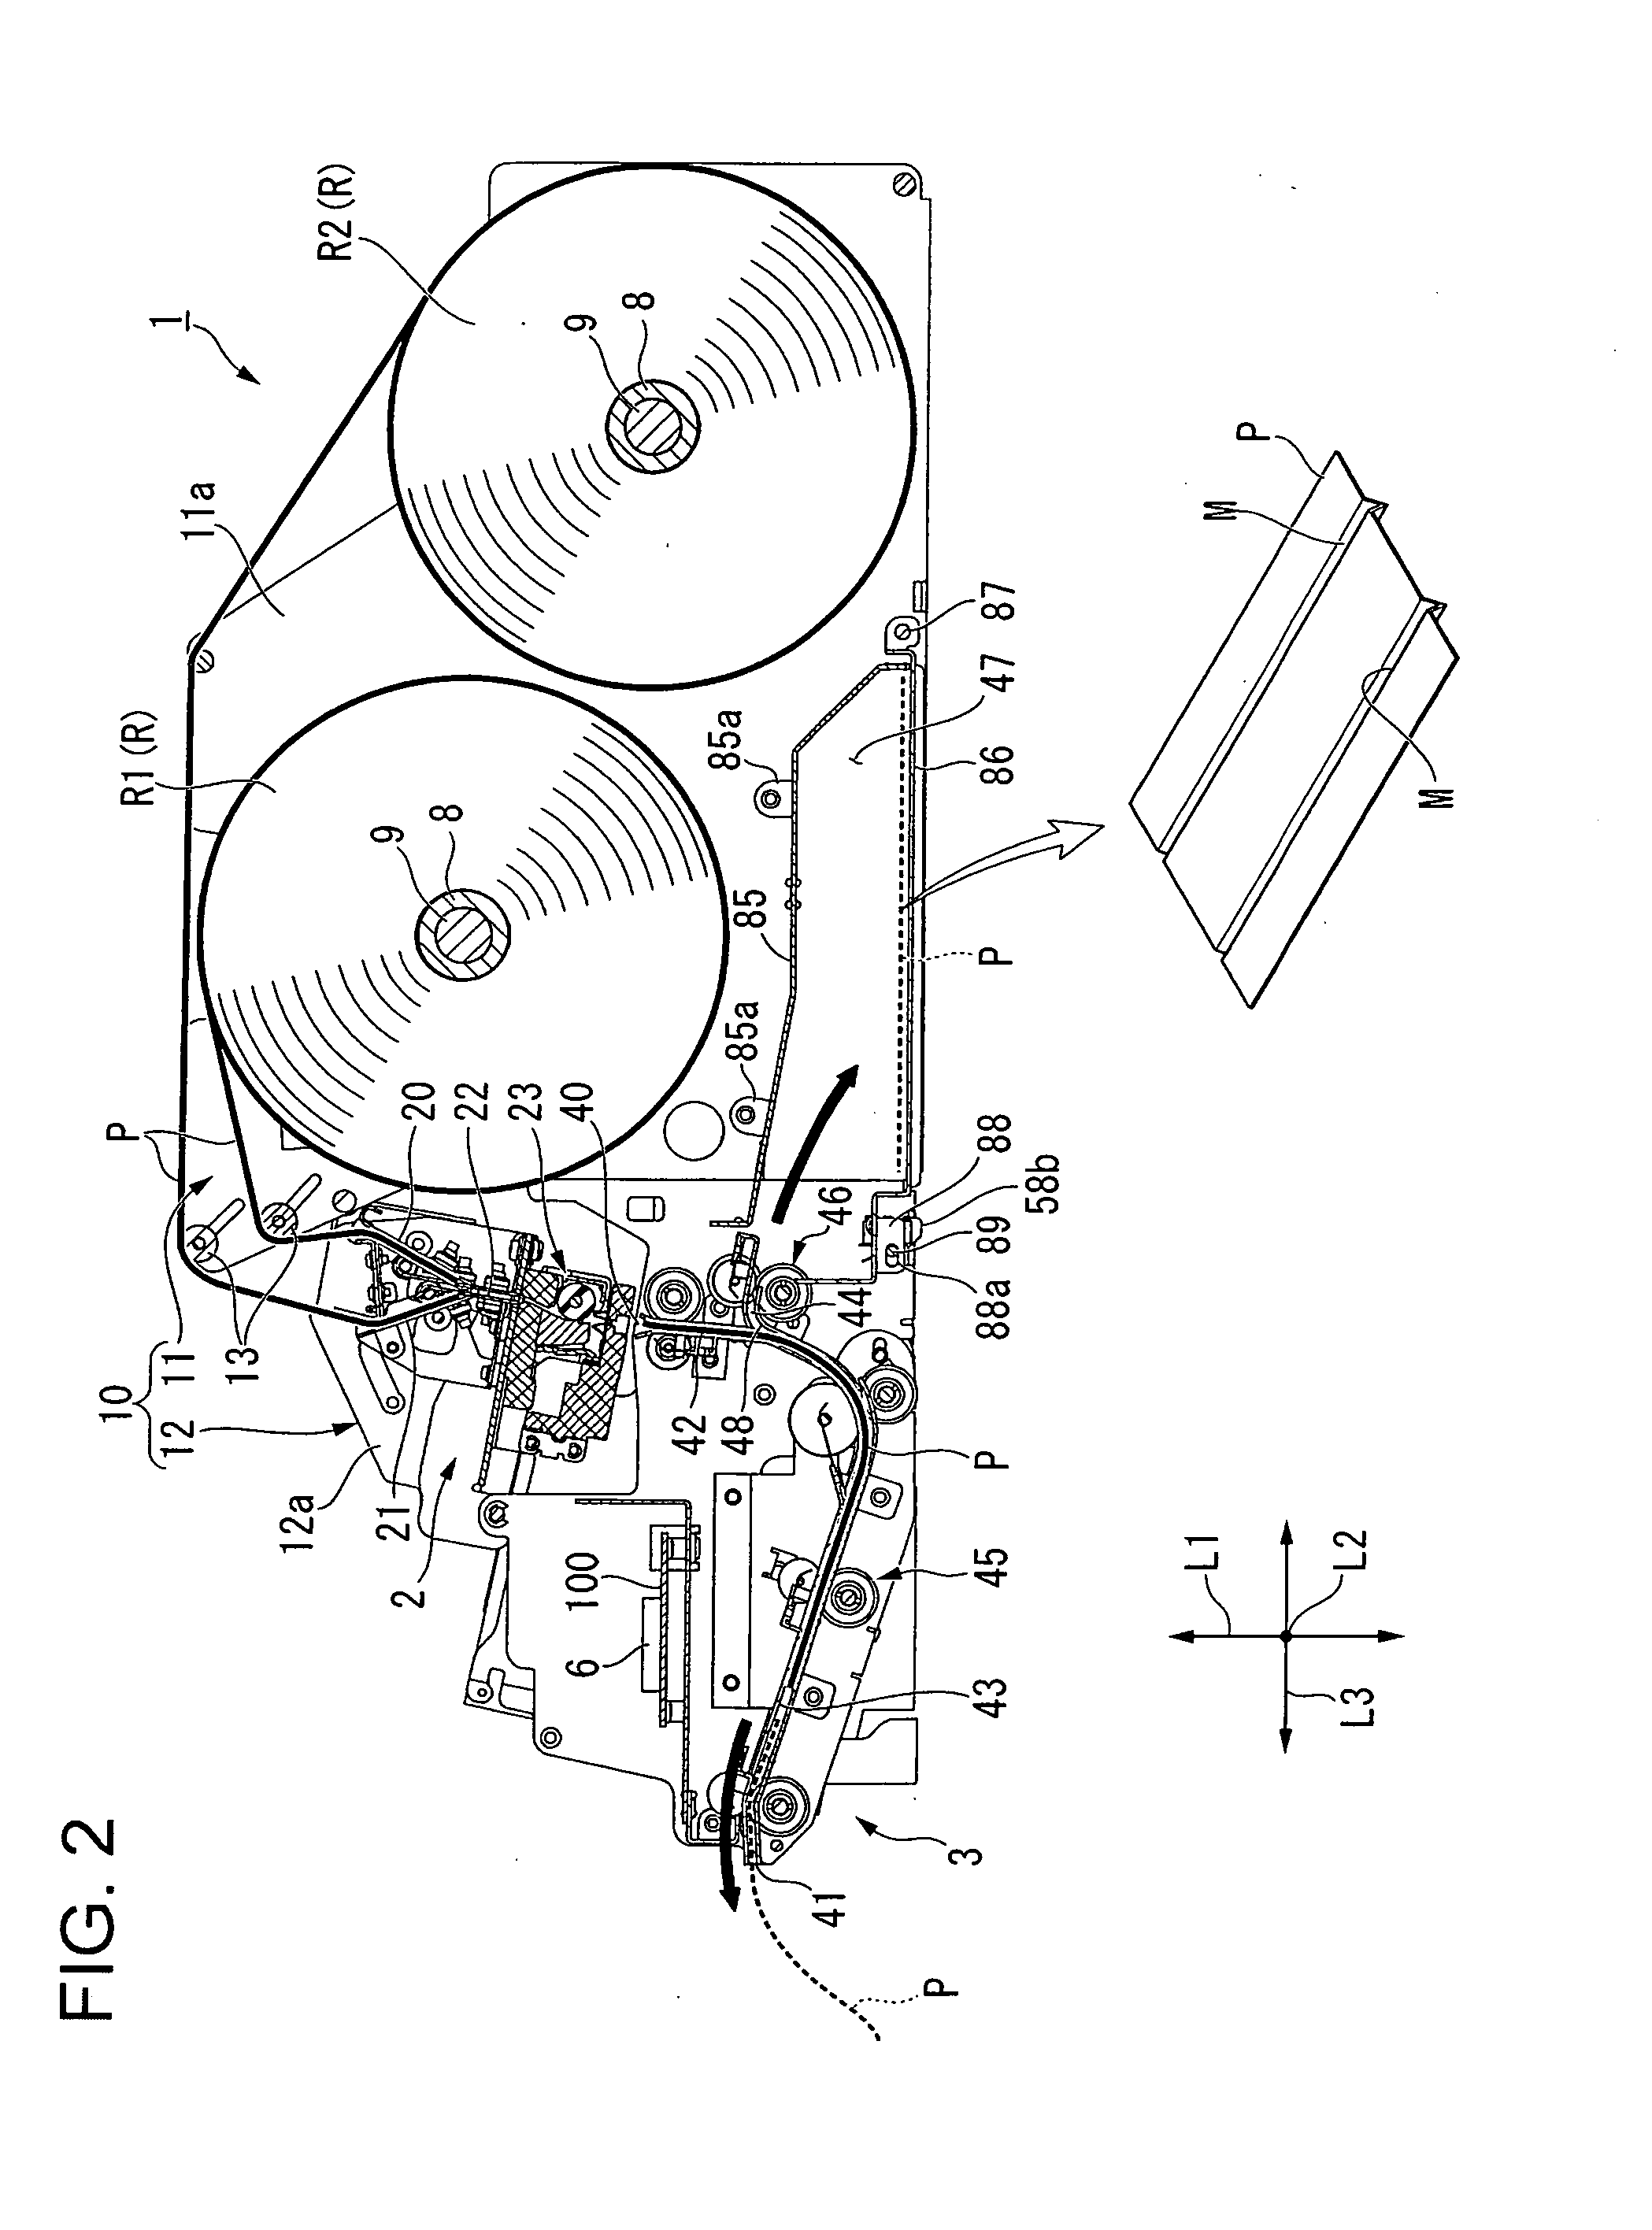 Paper discharge device